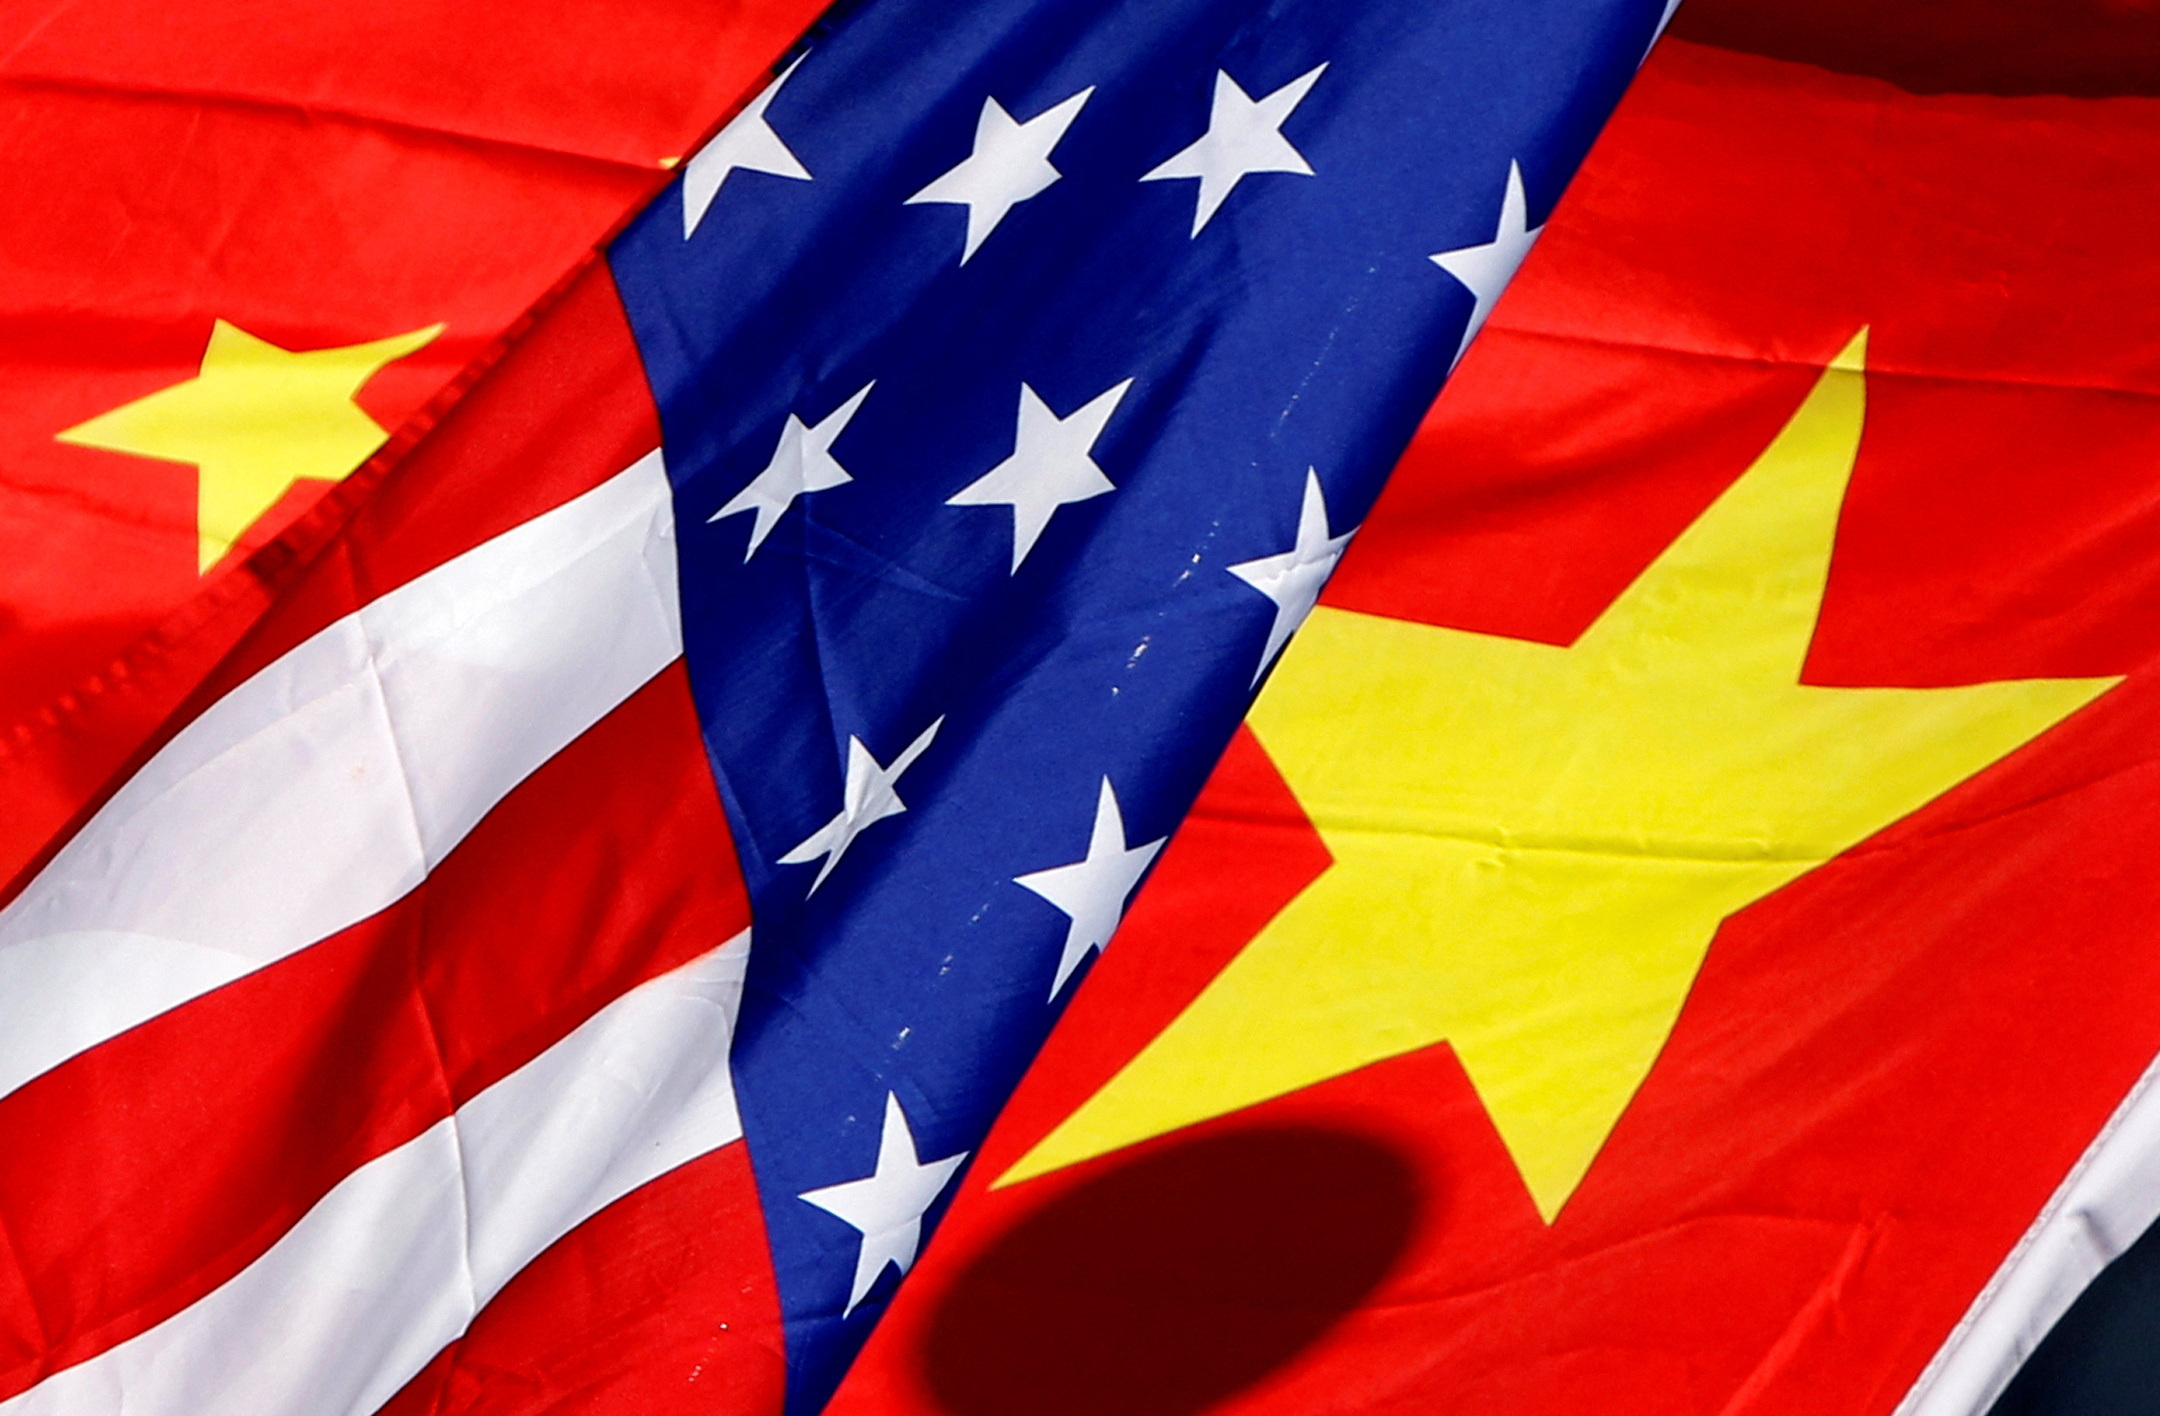 The national flags of the U.S. and China wave in front of an international hotel in Beijing